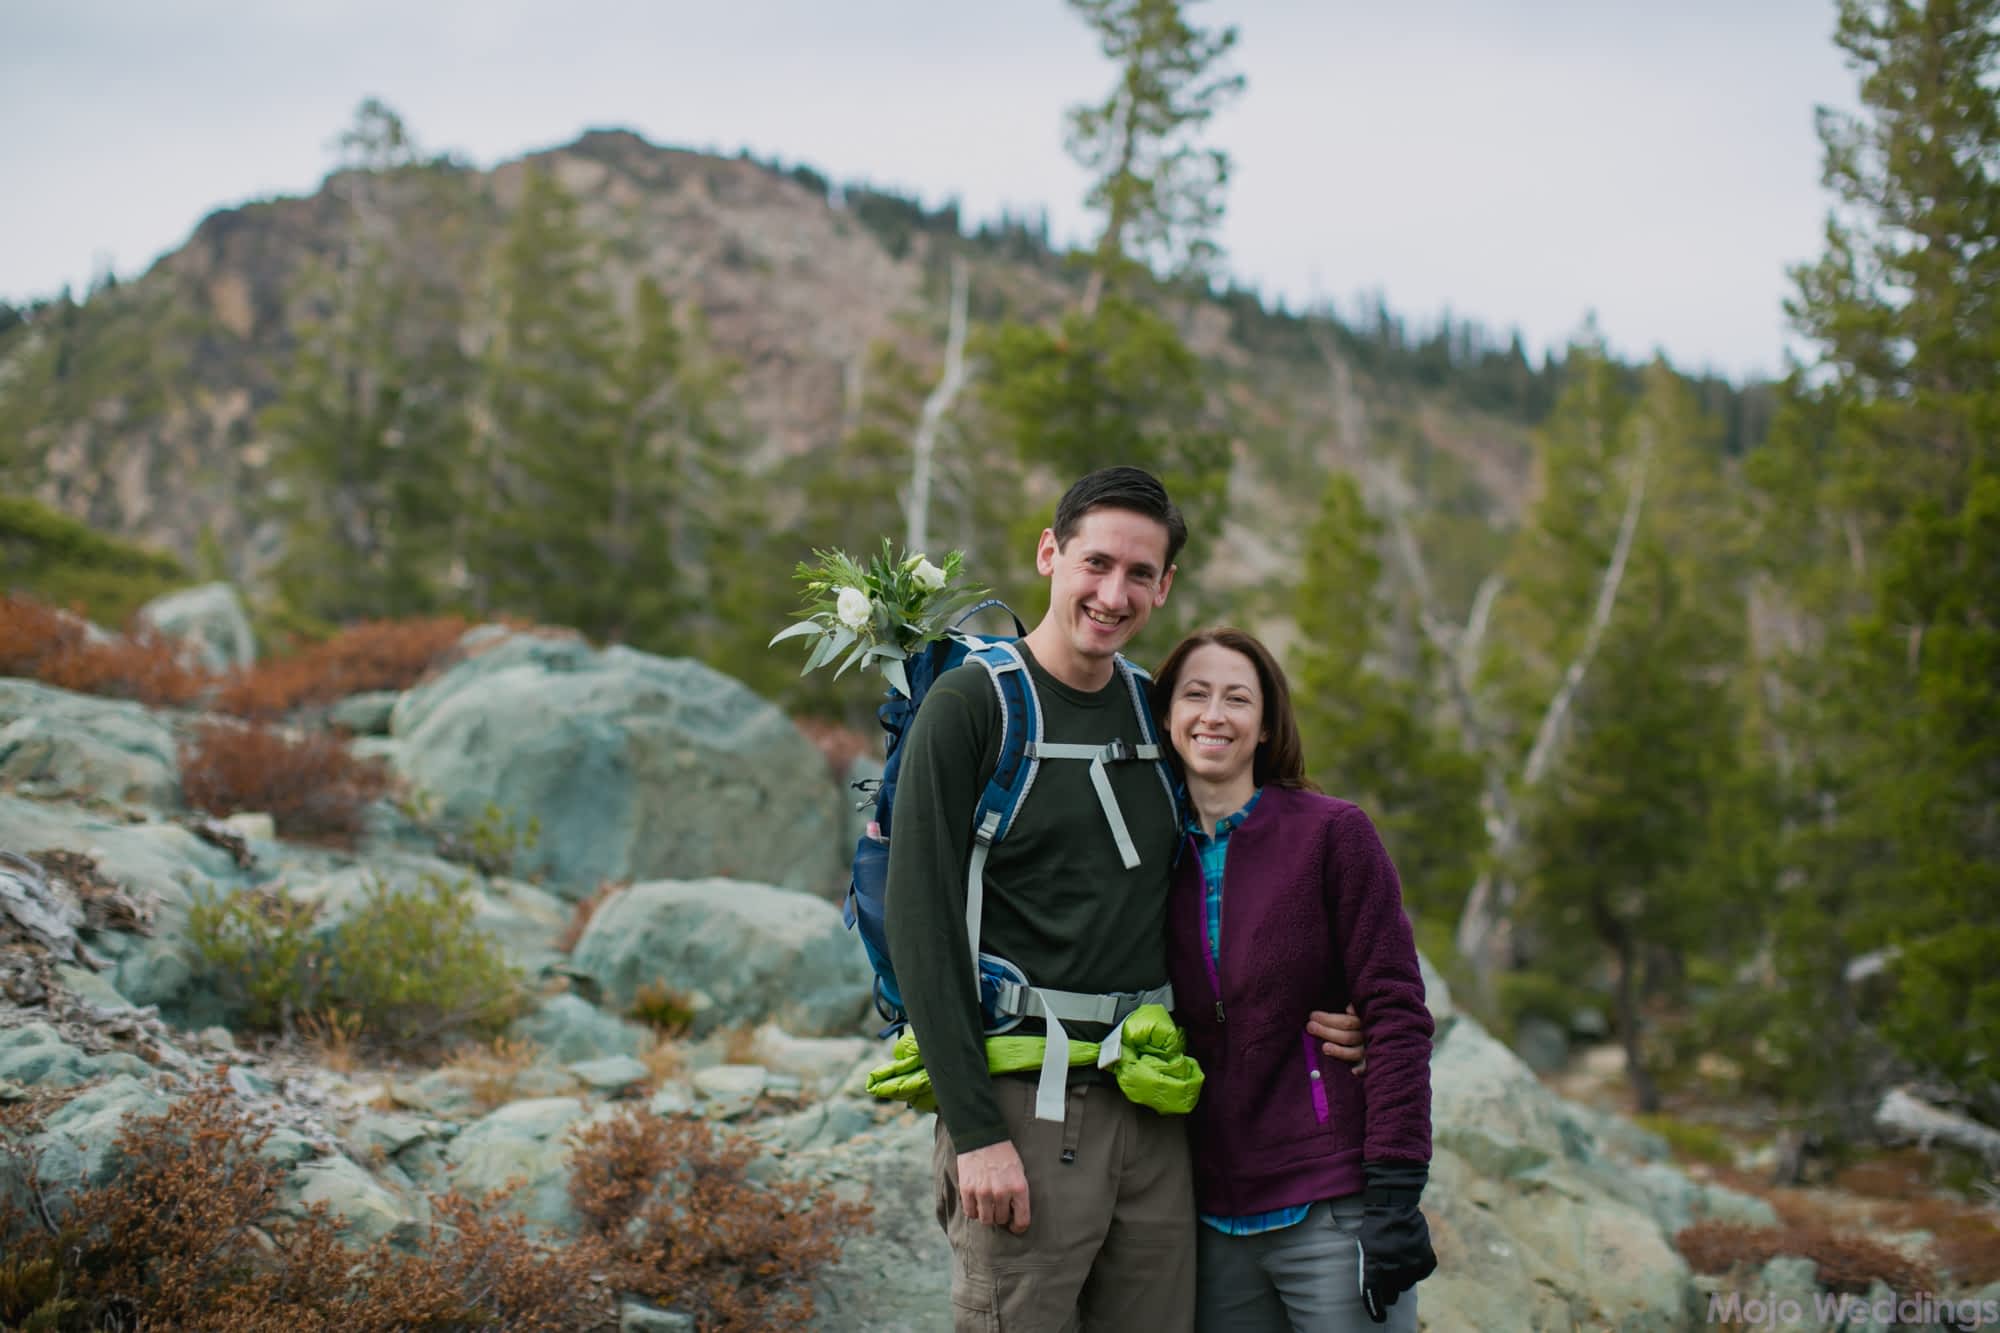 Dressed in hiking clothes, the couple smile for the camera in front of the mountain we will soon be on top of.